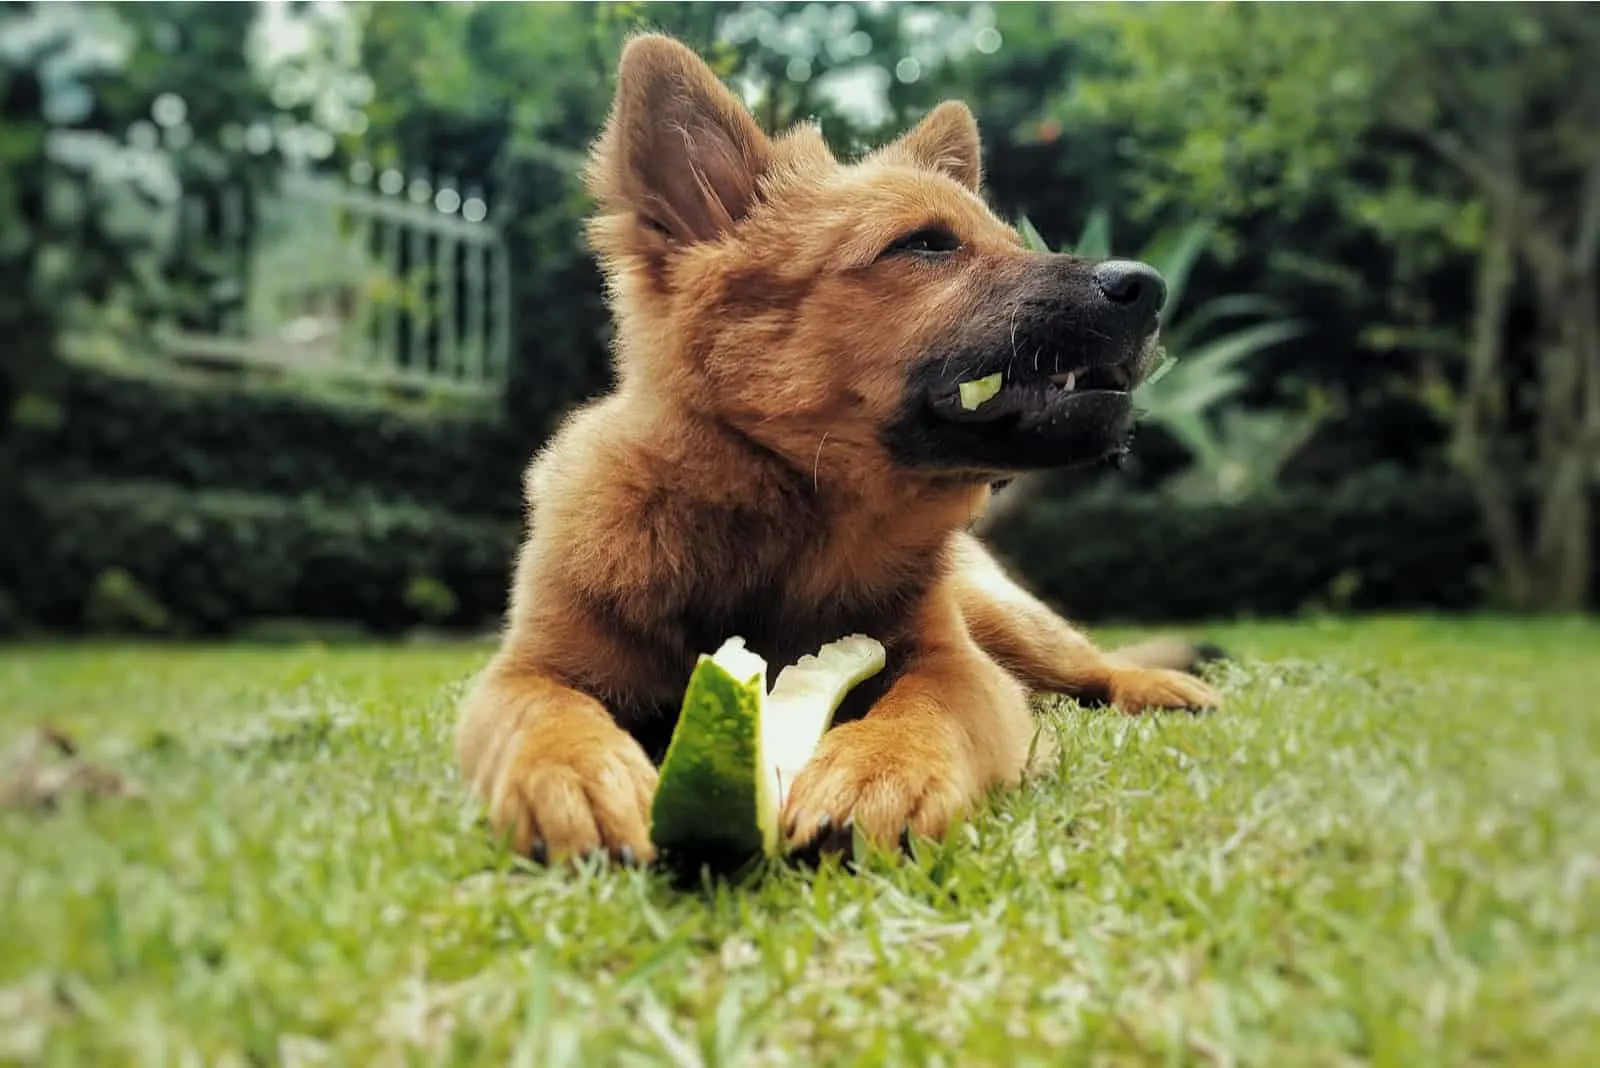 the dog lies on the grass and eats